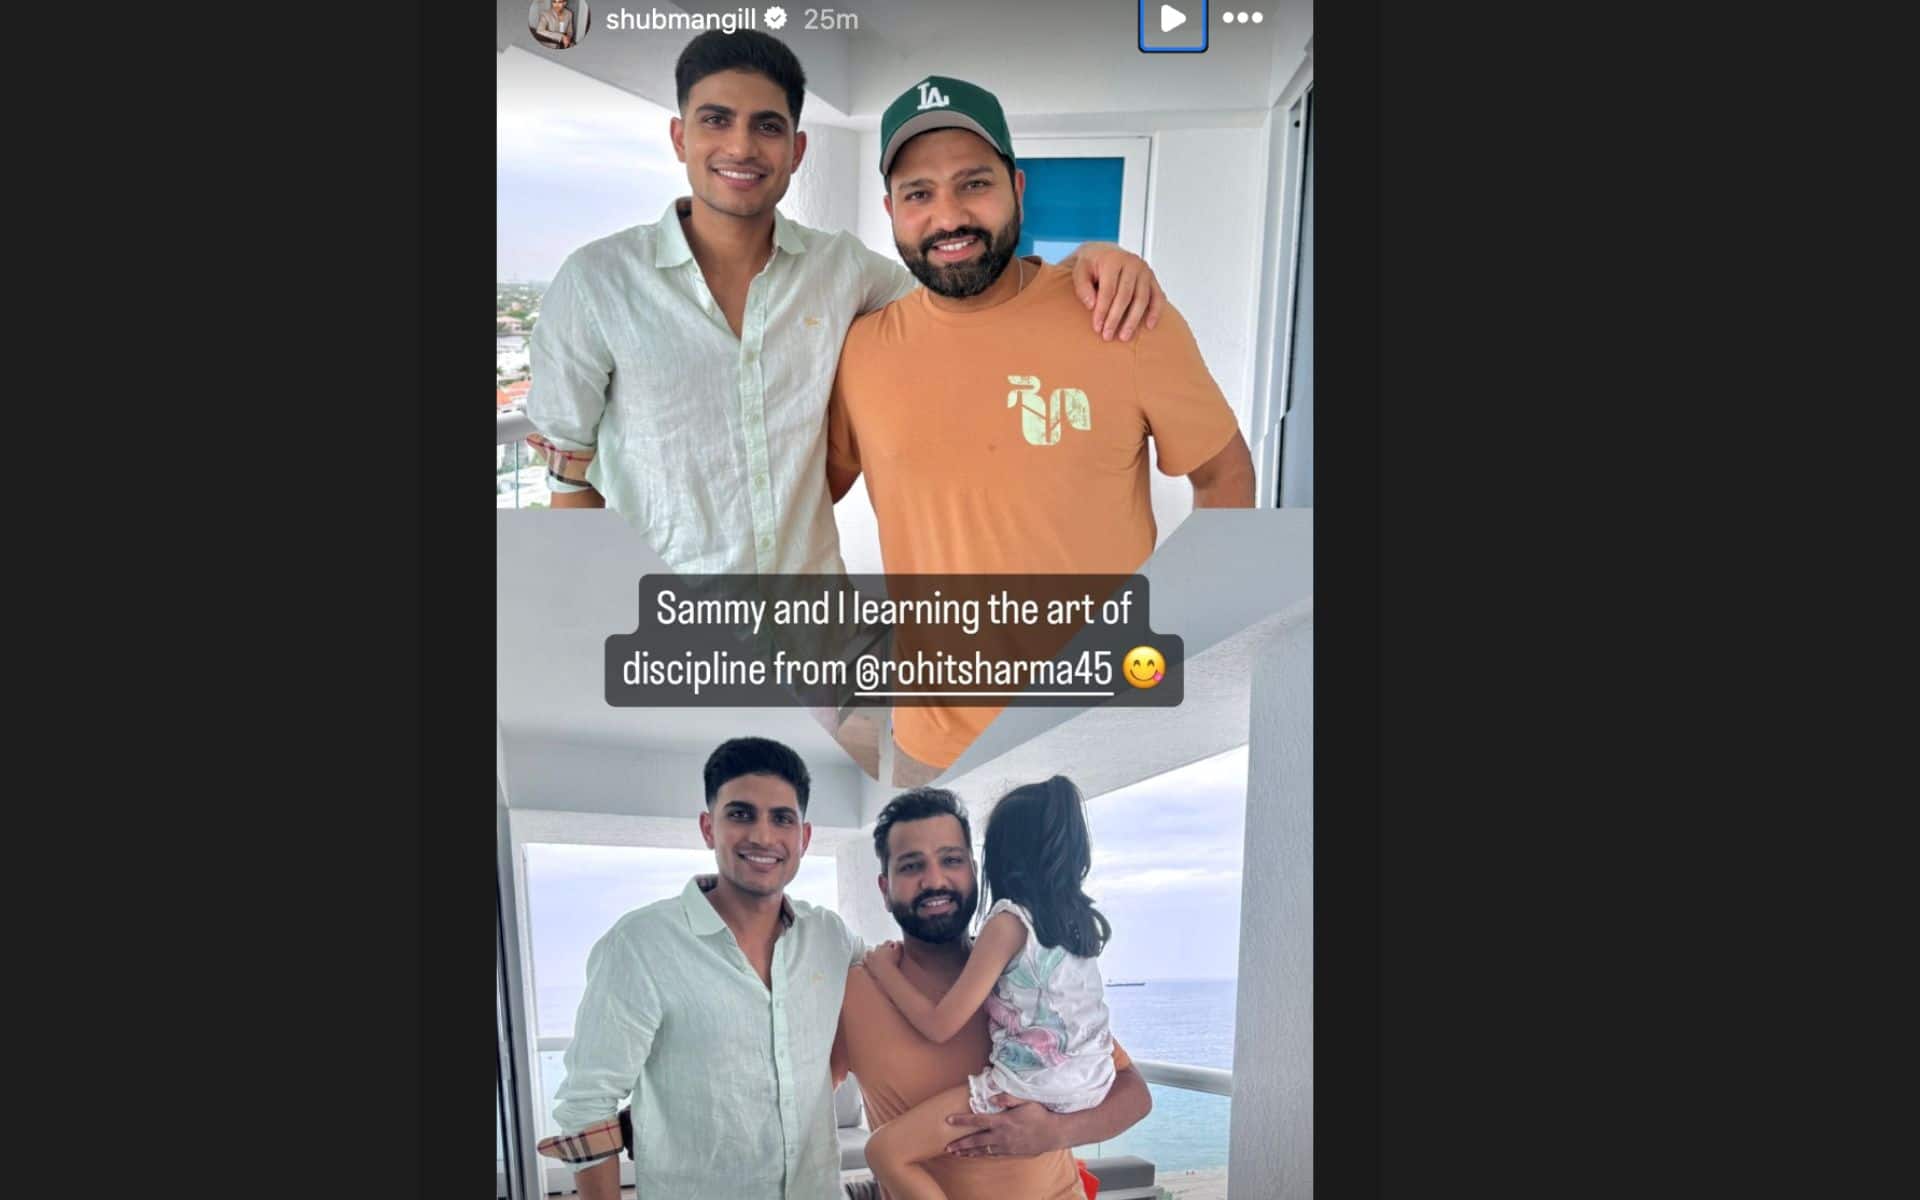 Shubman Gill with Indian captain Rohit Sharma in USA (X.com)